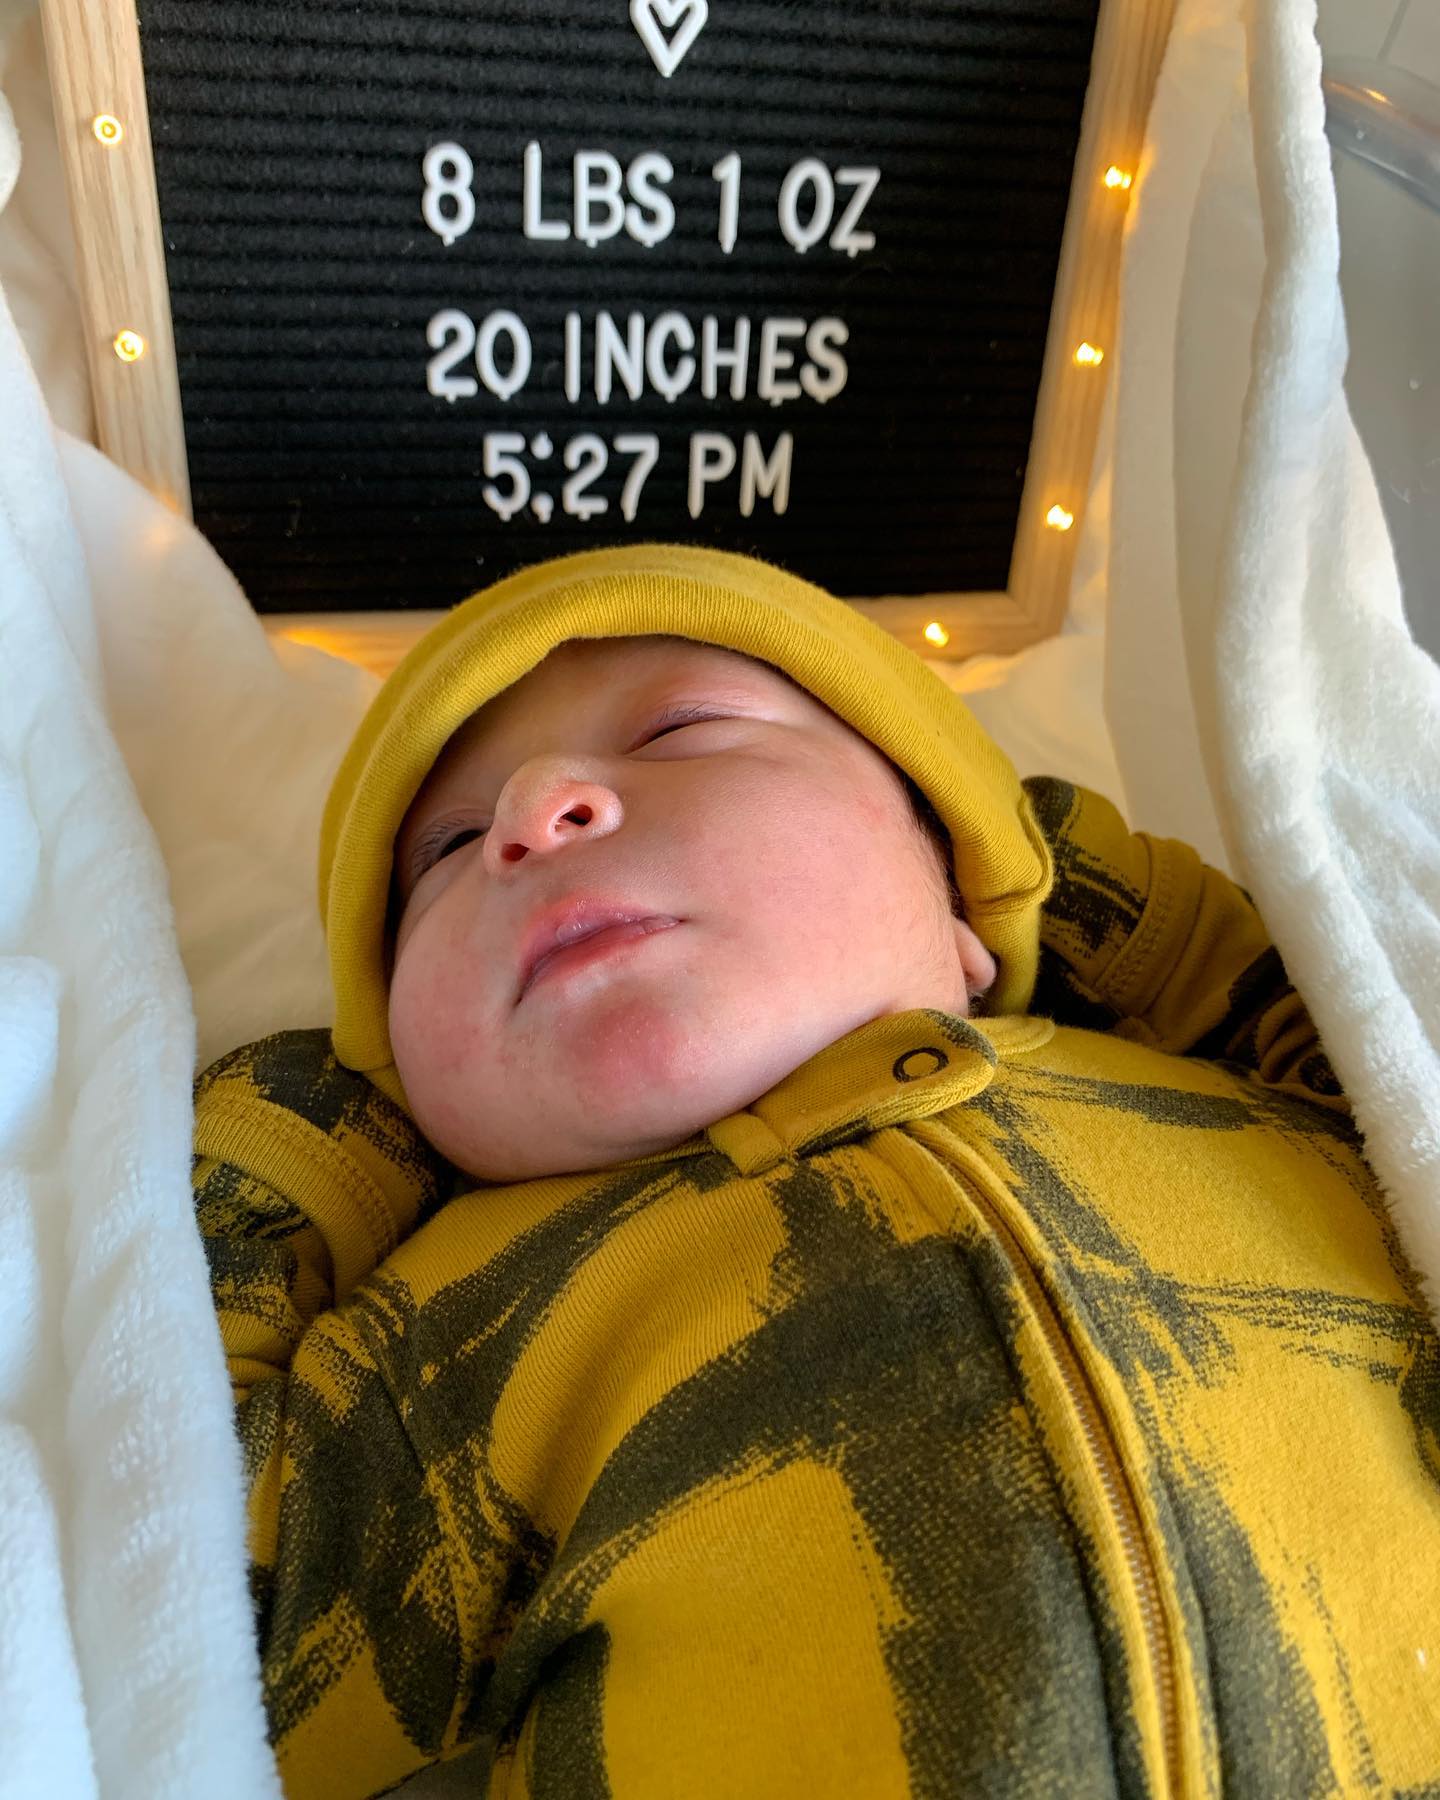 What a way to end the Year! Happy Born Day Baby Cyrus, born on 12/29/2020 at 5:27pm 8 lbs 1 oz 20 inches! Cant wait to show Mila her new baby brother! We have ourselves another sports fan in the house ...Let's goooo
.
.
.